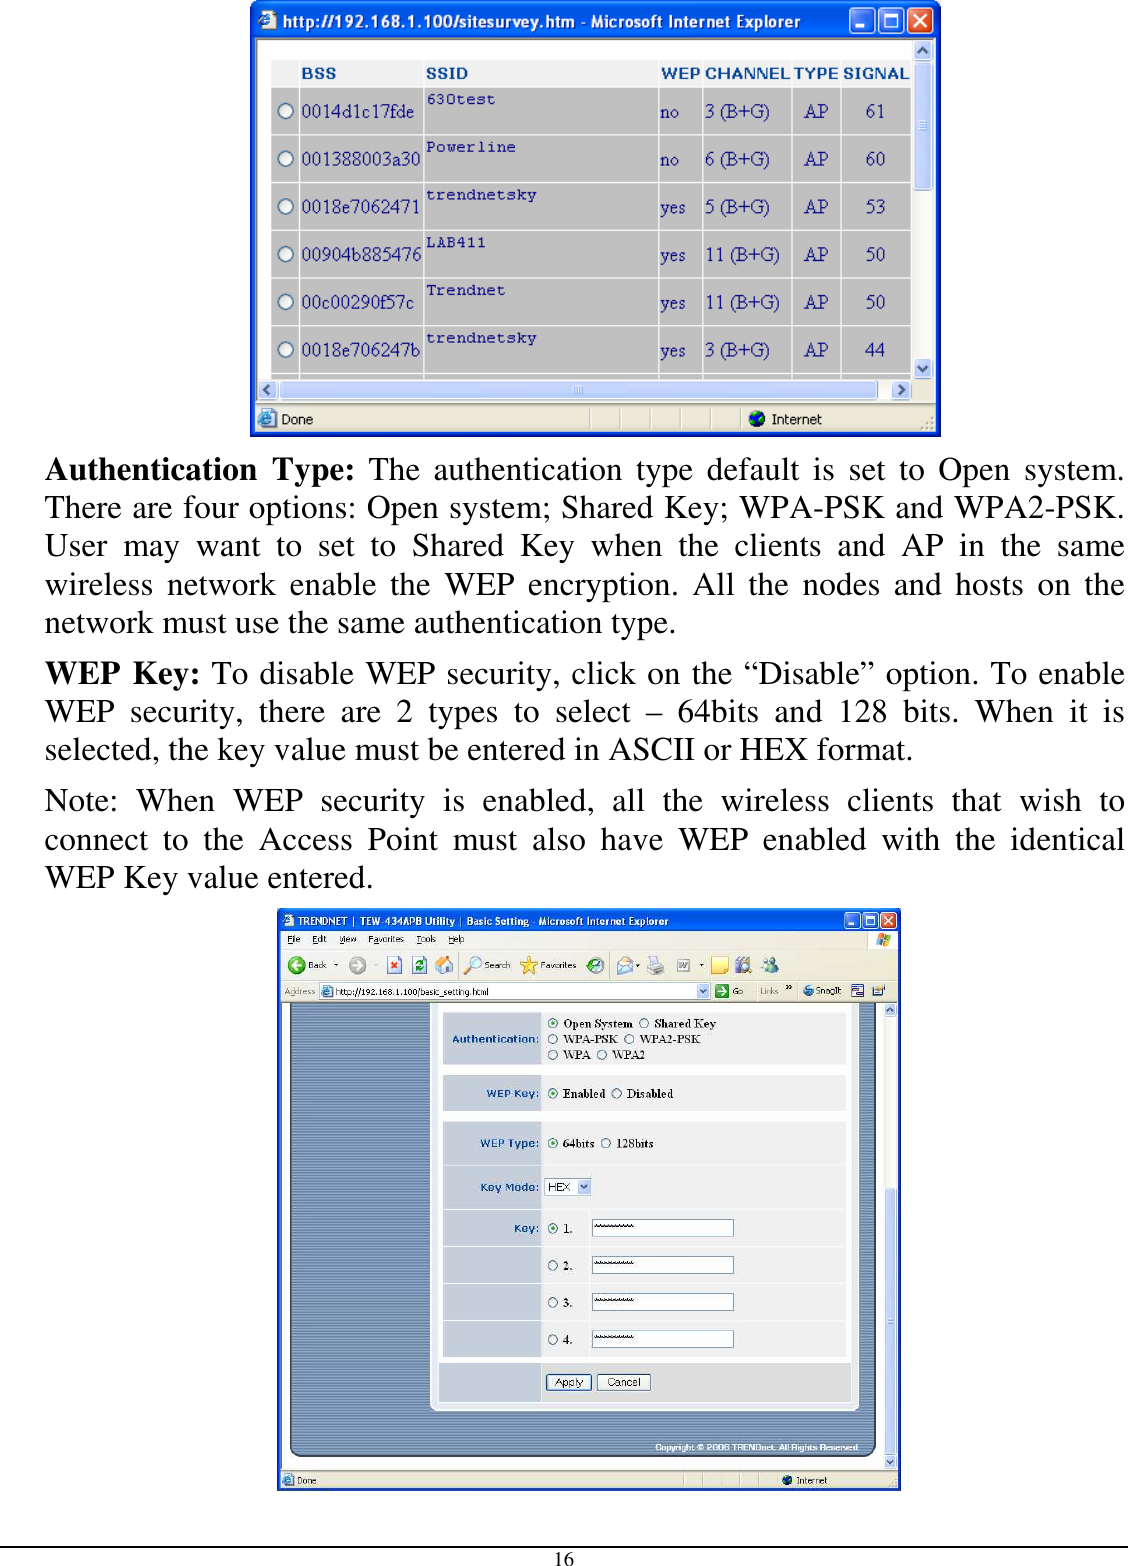  16  Authentication  Type:  The  authentication  type default  is  set  to  Open  system.  There are four options: Open system; Shared Key; WPA-PSK and WPA2-PSK. User  may  want  to  set  to  Shared  Key  when  the  clients  and  AP  in  the  same wireless  network  enable  the  WEP  encryption.  All  the  nodes  and  hosts  on  the network must use the same authentication type.   WEP Key: To disable WEP security, click on the “Disable” option. To enable WEP  security,  there  are  2  types  to  select  –  64bits  and  128  bits.  When  it  is selected, the key value must be entered in ASCII or HEX format. Note:  When  WEP  security  is  enabled,  all  the  wireless  clients  that  wish  to connect  to  the  Access  Point  must  also  have  WEP  enabled  with  the  identical WEP Key value entered.   